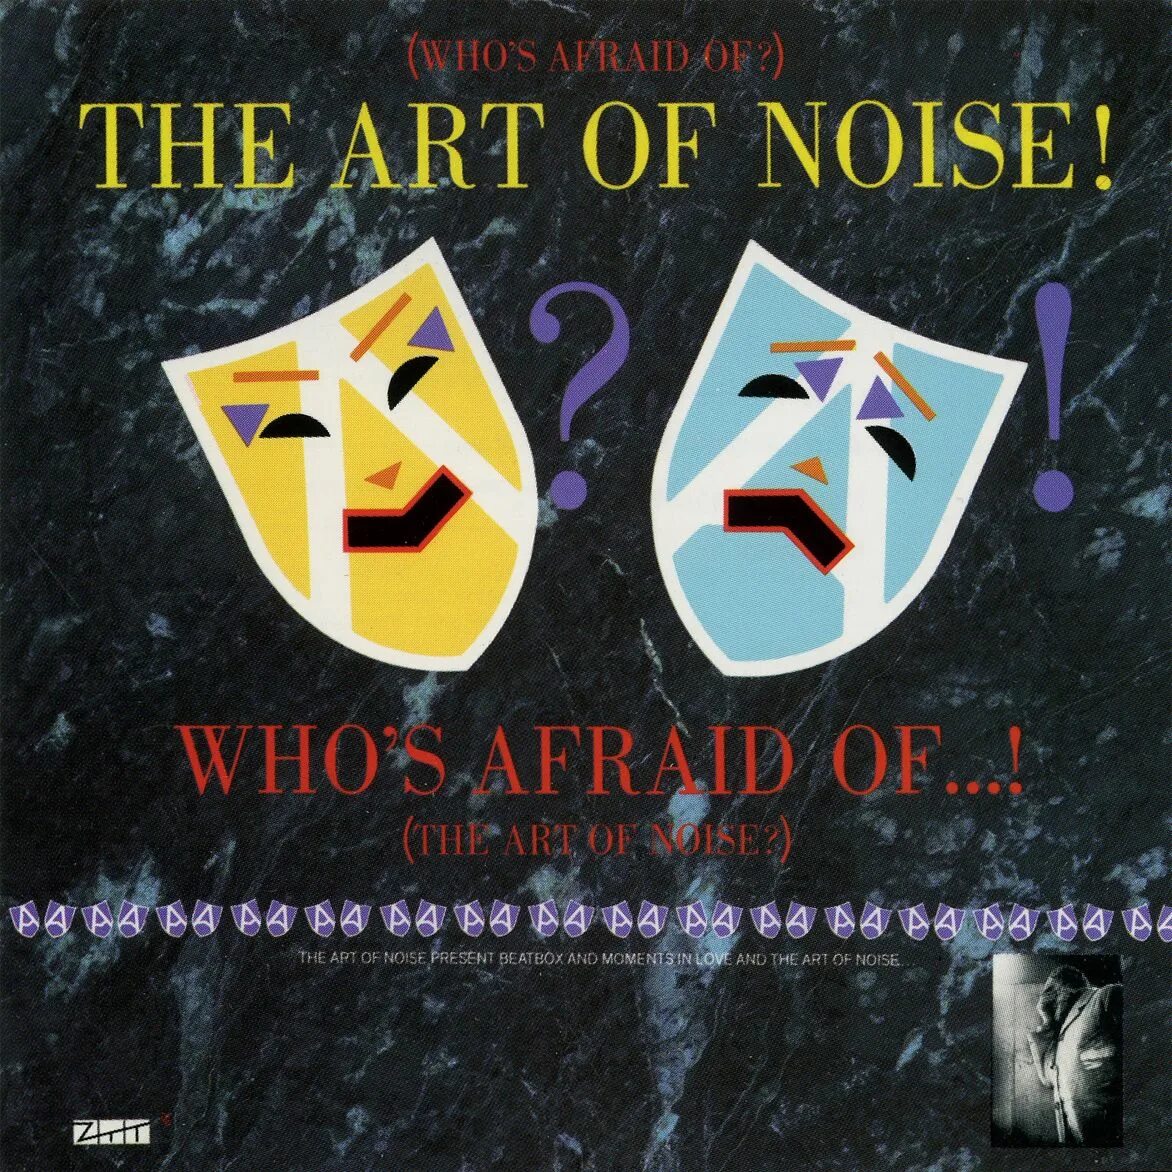 Lots of noise. Art of Noise. Who's afraid of the Art of Noise?. The Art of Noise 1984 who`s afraid of the Art of Noise. Art of Noise moments in Love.